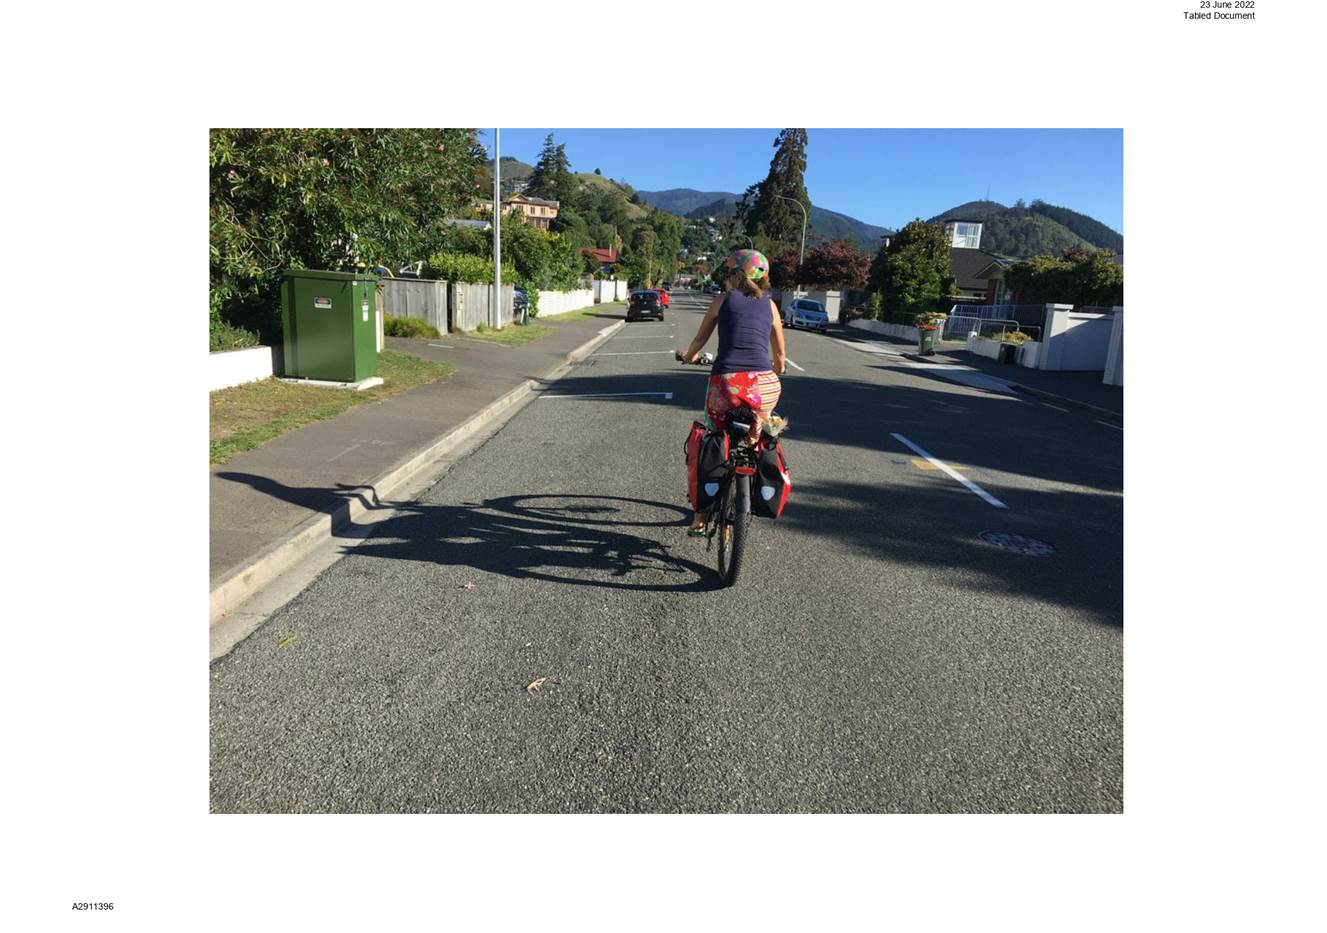 A person riding a bicycle on a street

Description automatically generated with low confidence